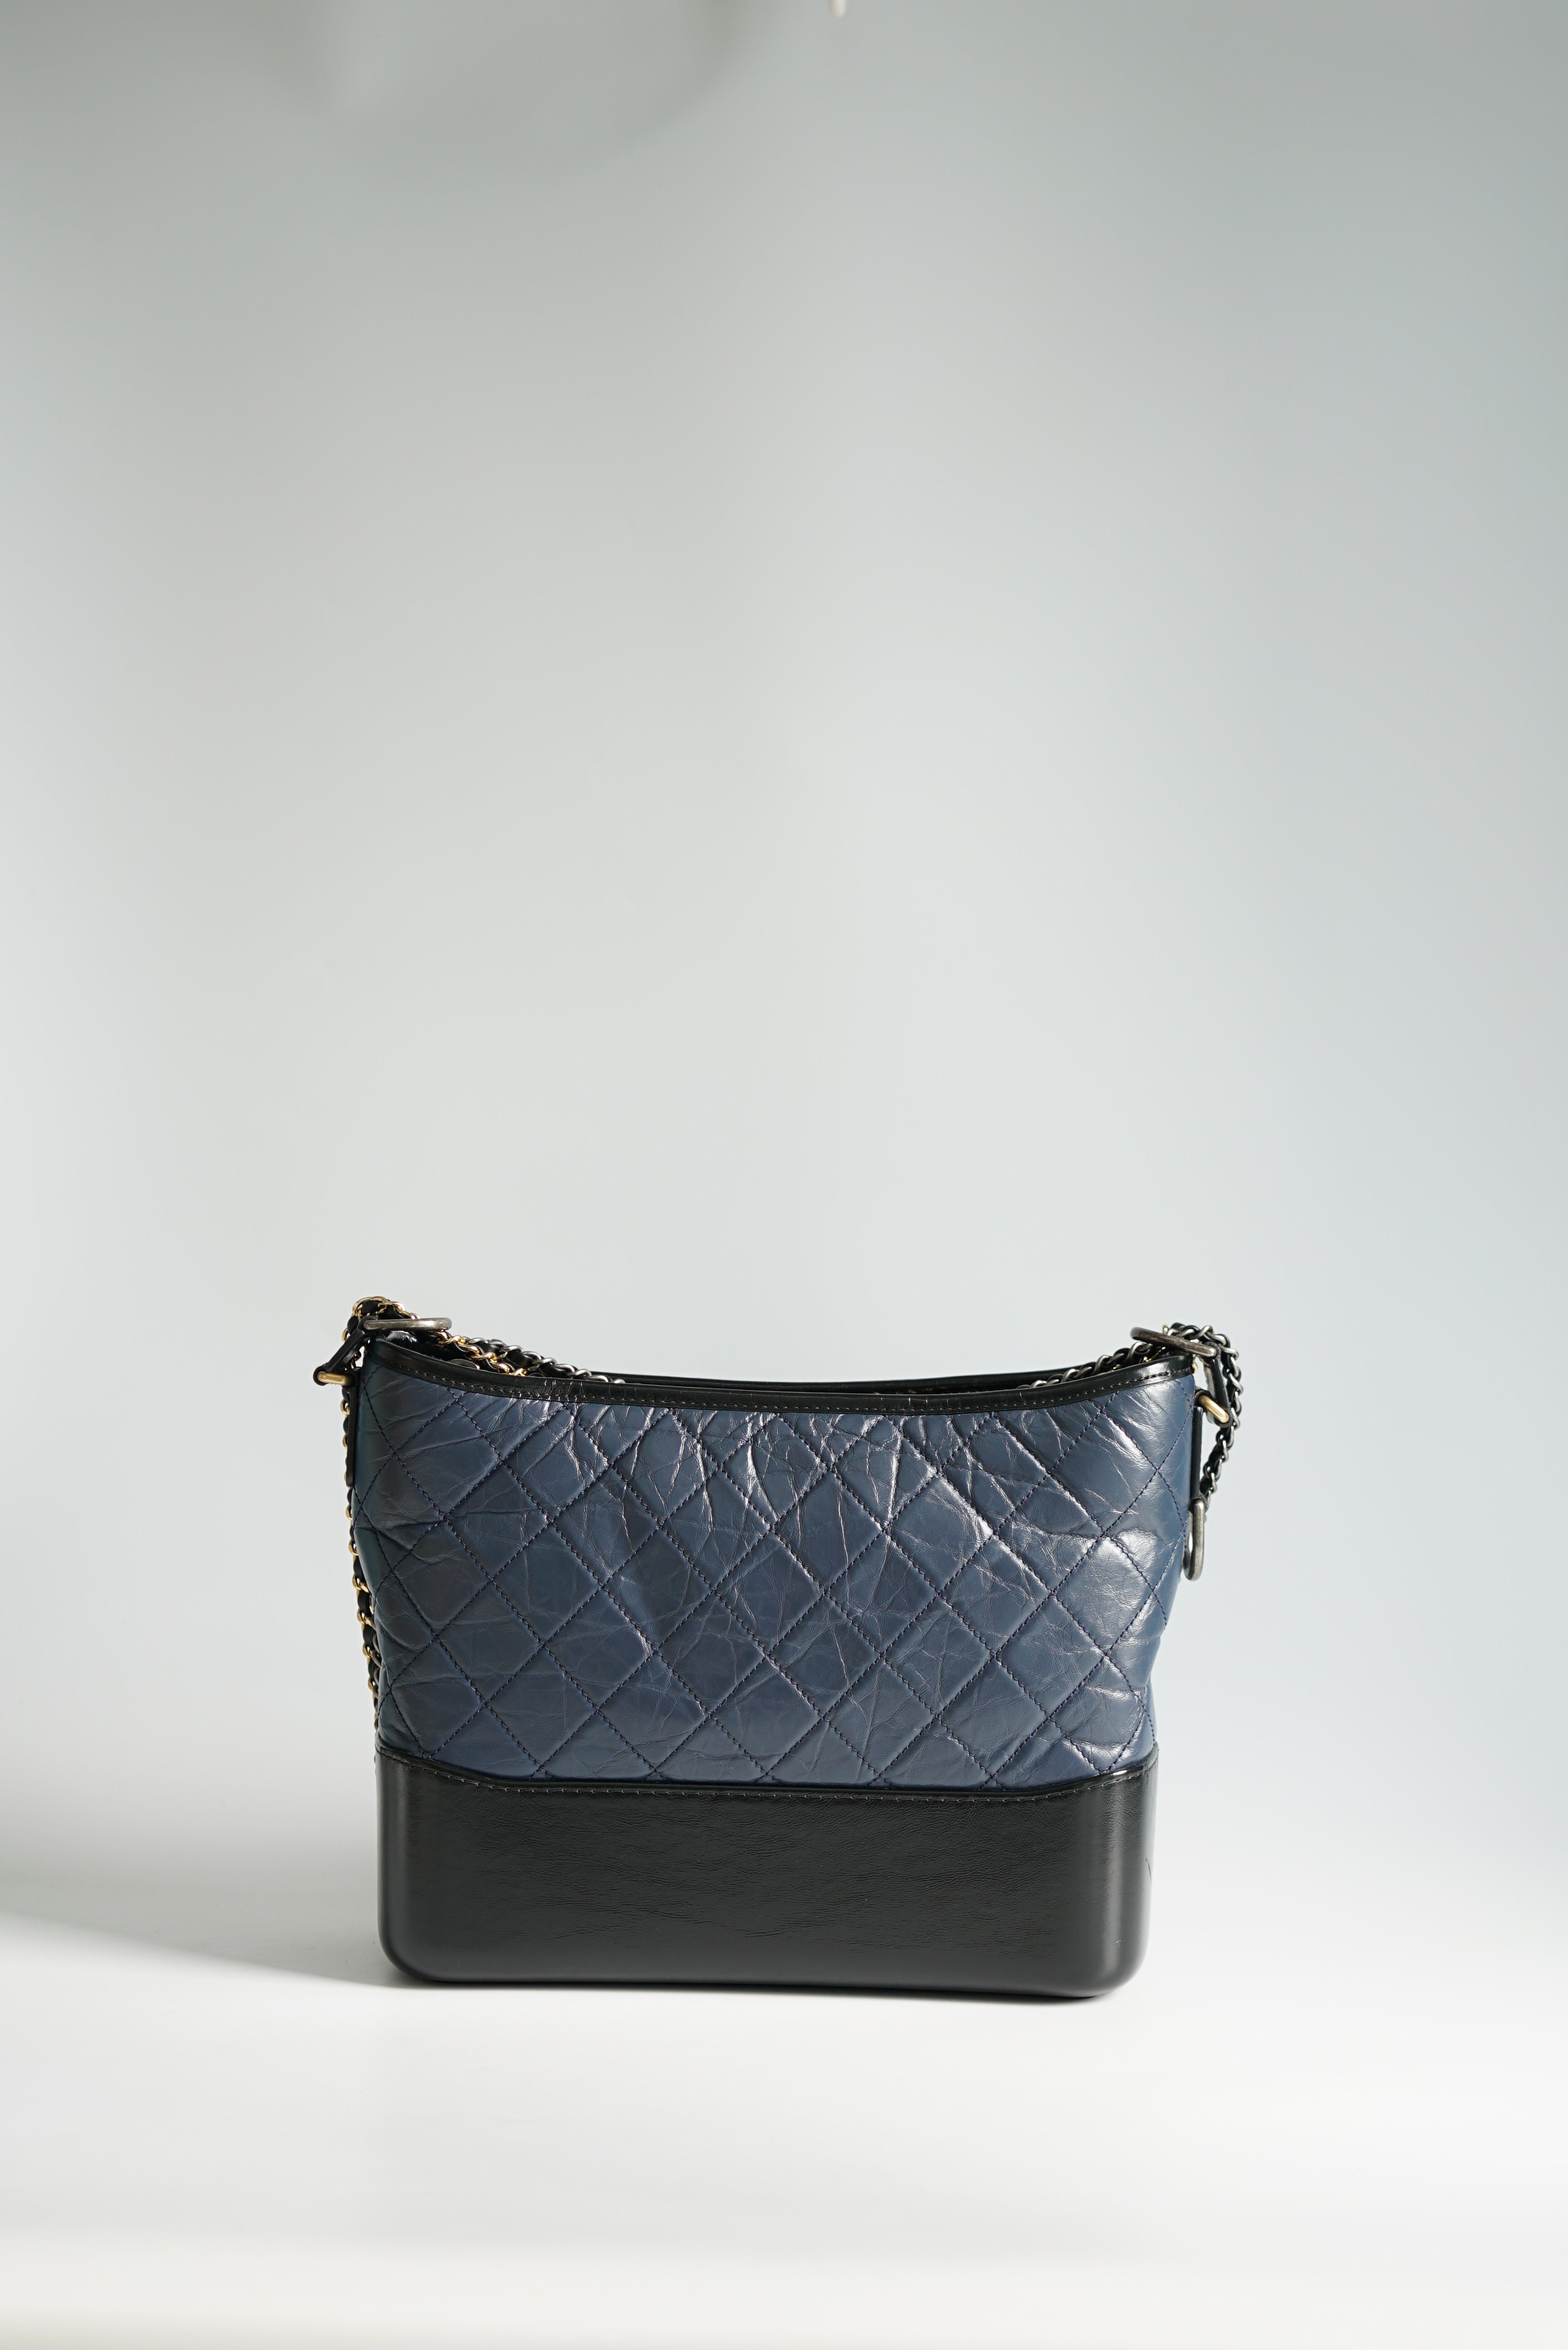 Chanel Gabrielle Medium Hobo Bag in Navy Blue Distressed Calfskin Leather & Mixed Hardware (Series 26)